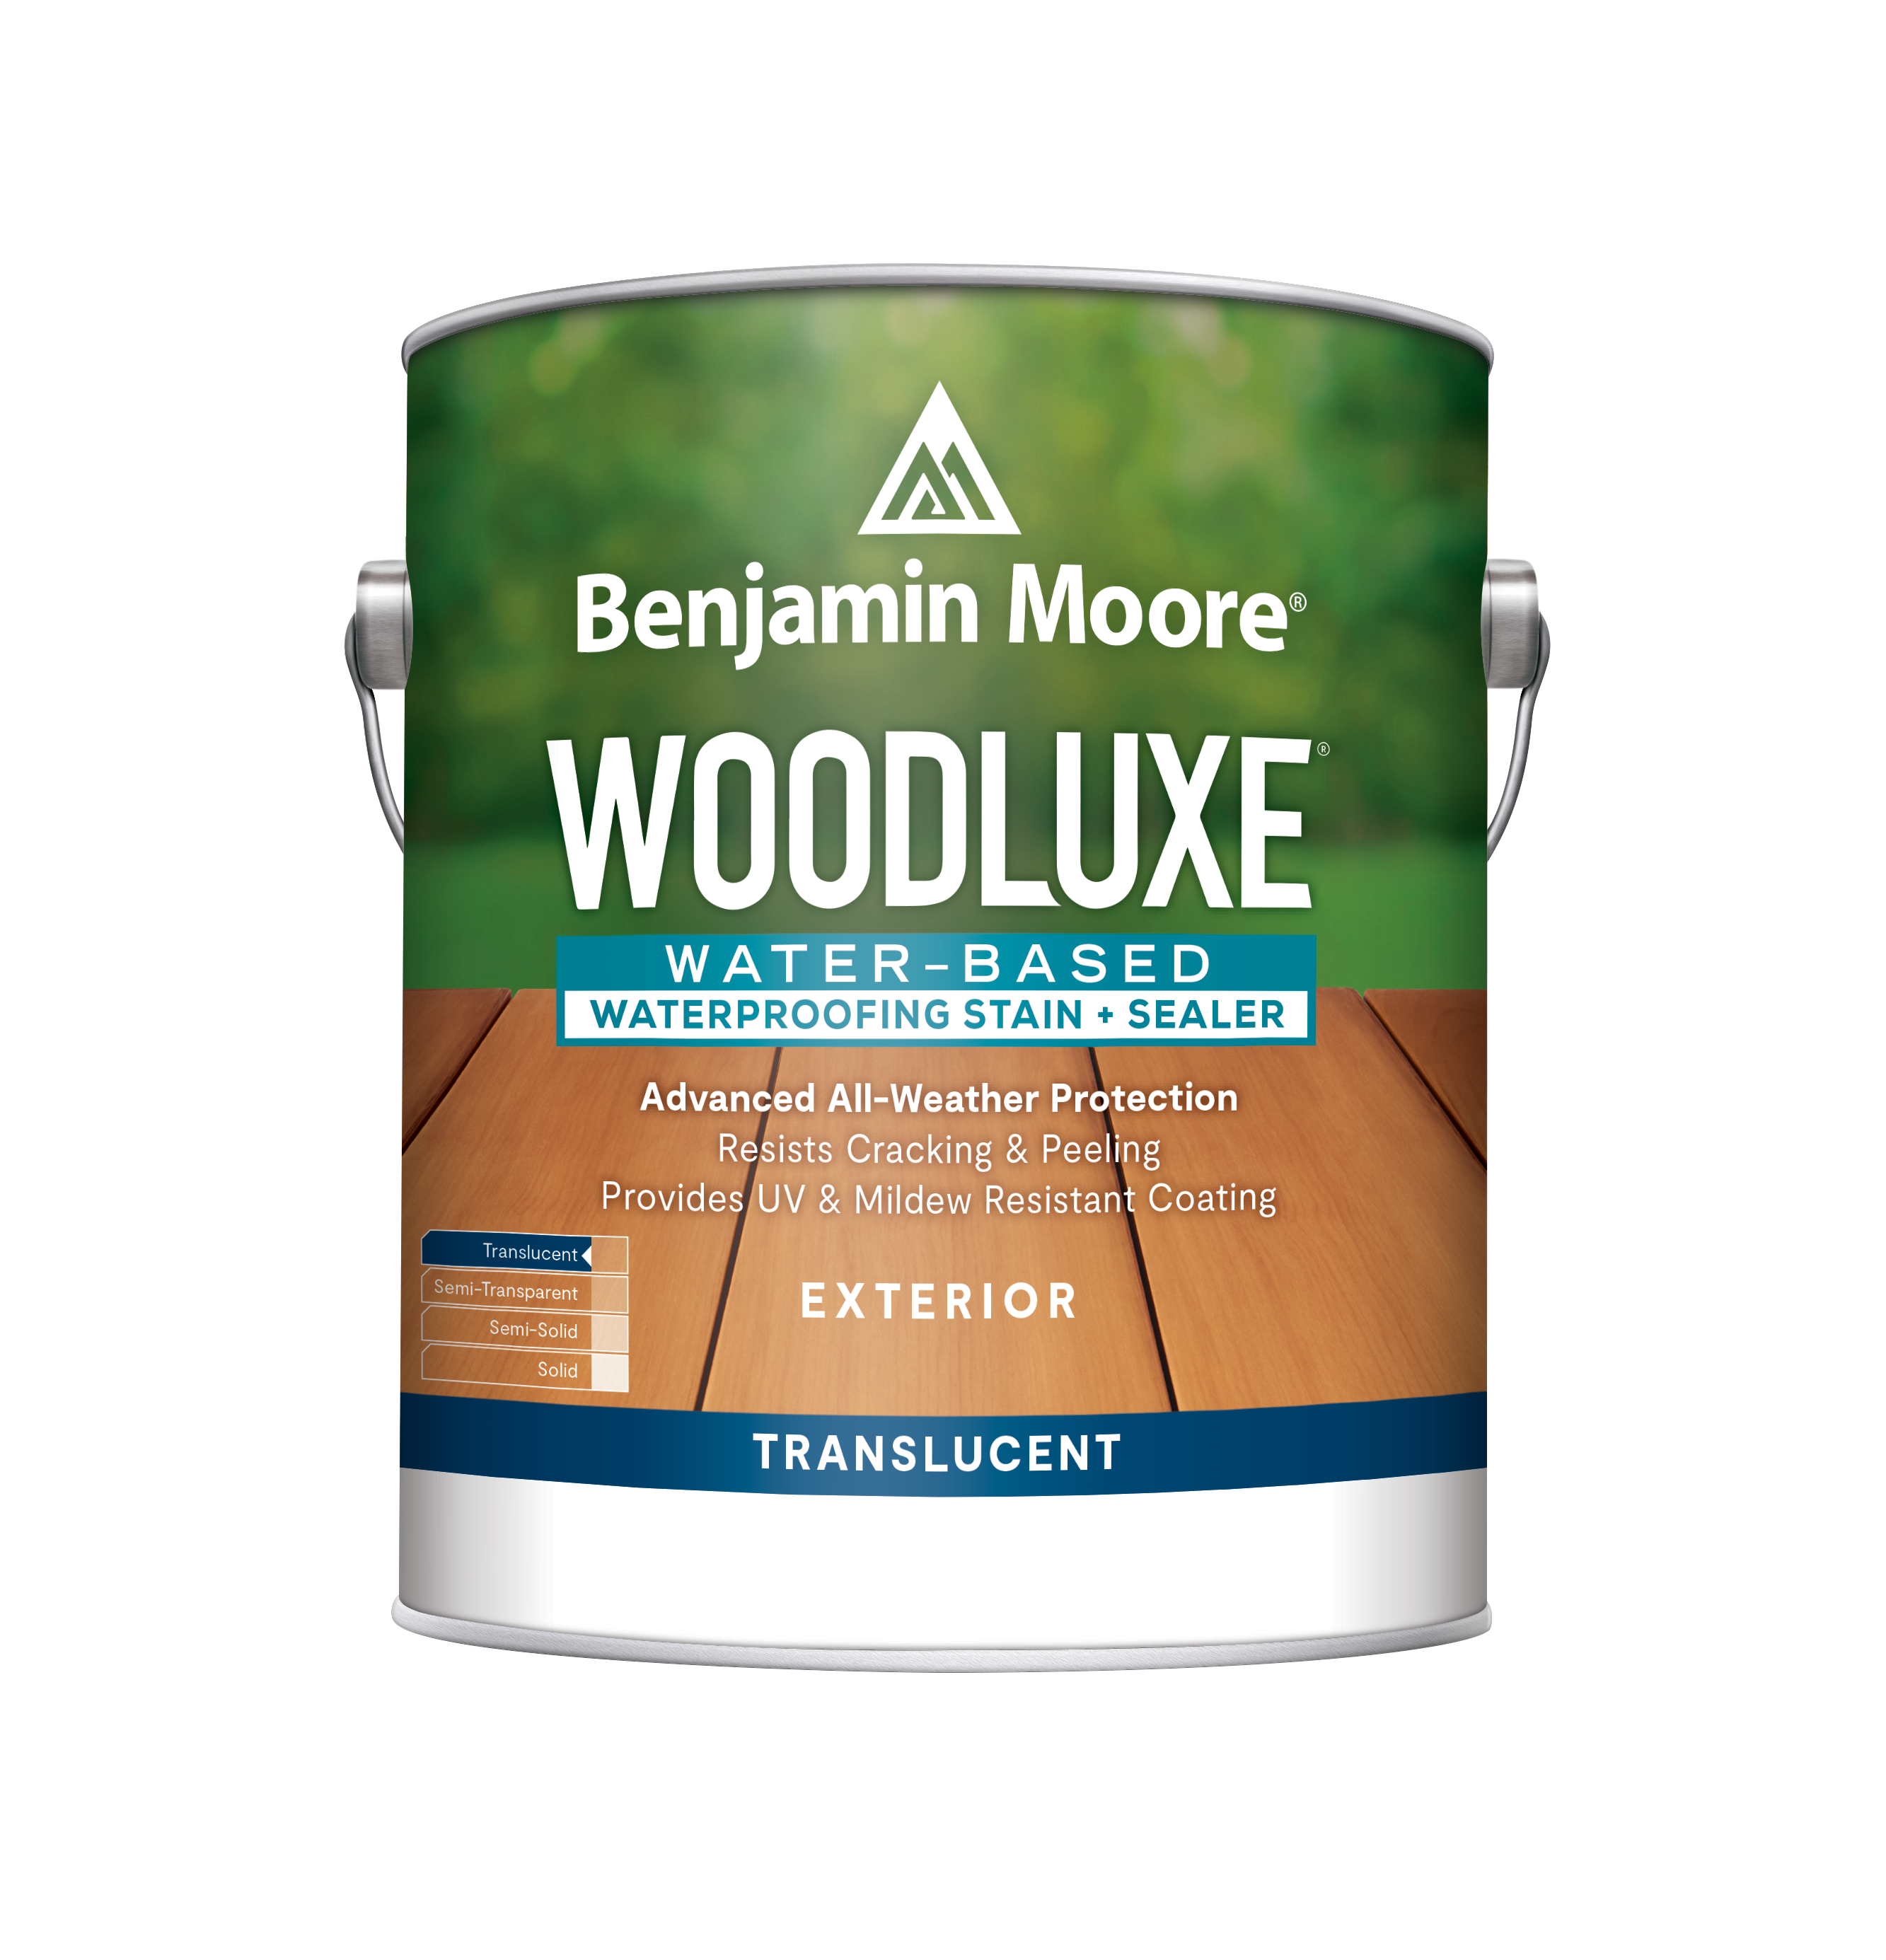 Woodluxe® Water-Based Waterproofing Stain + Sealer - Translucent 0691